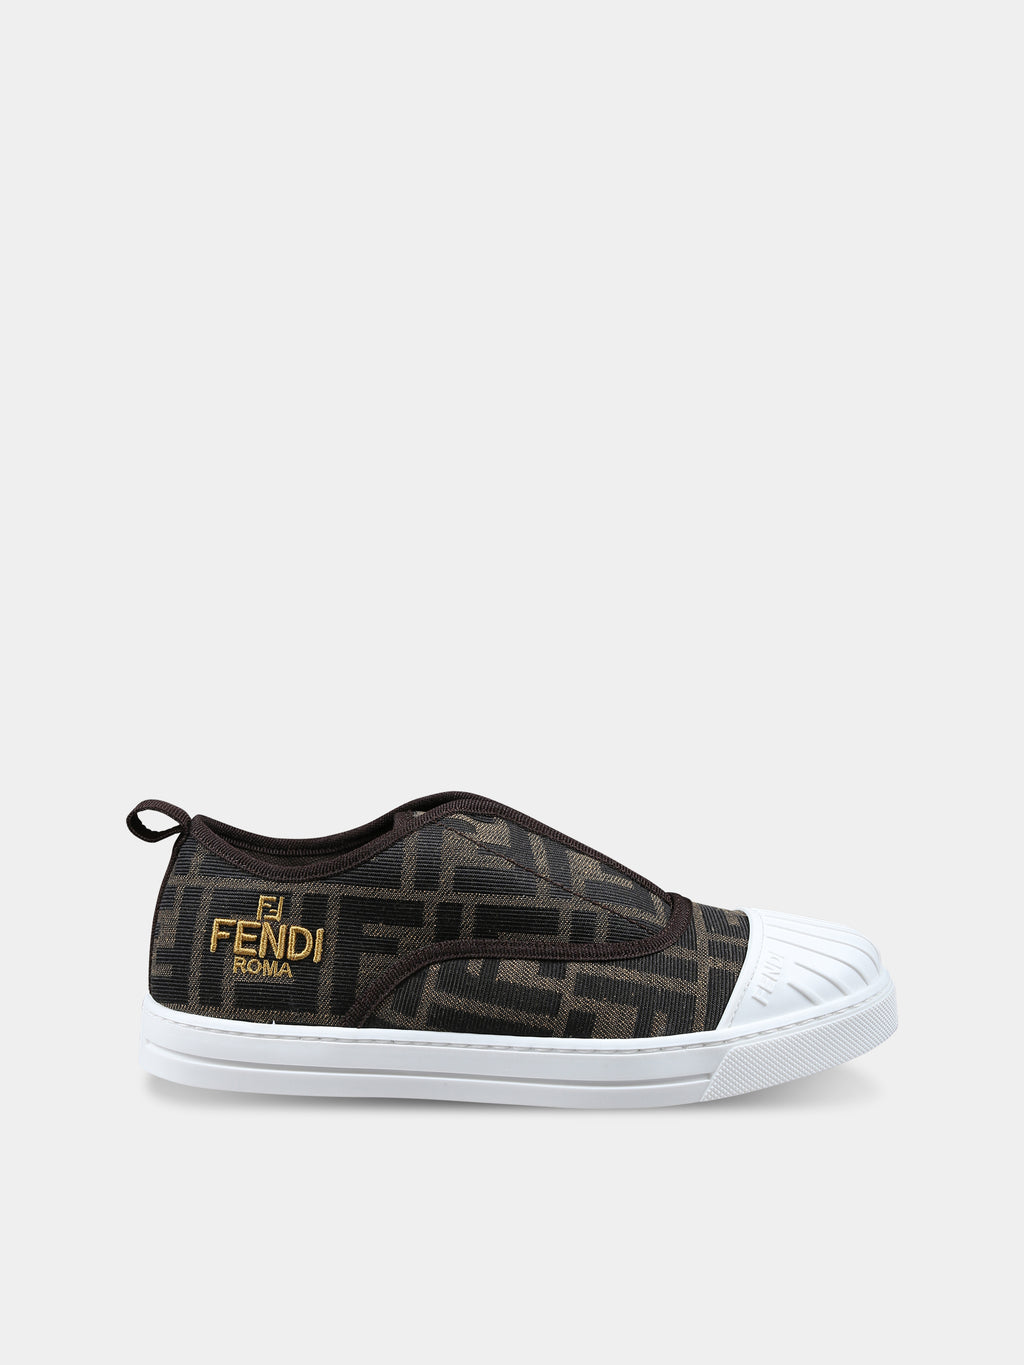 Sneakers for kids with all-over FF logo